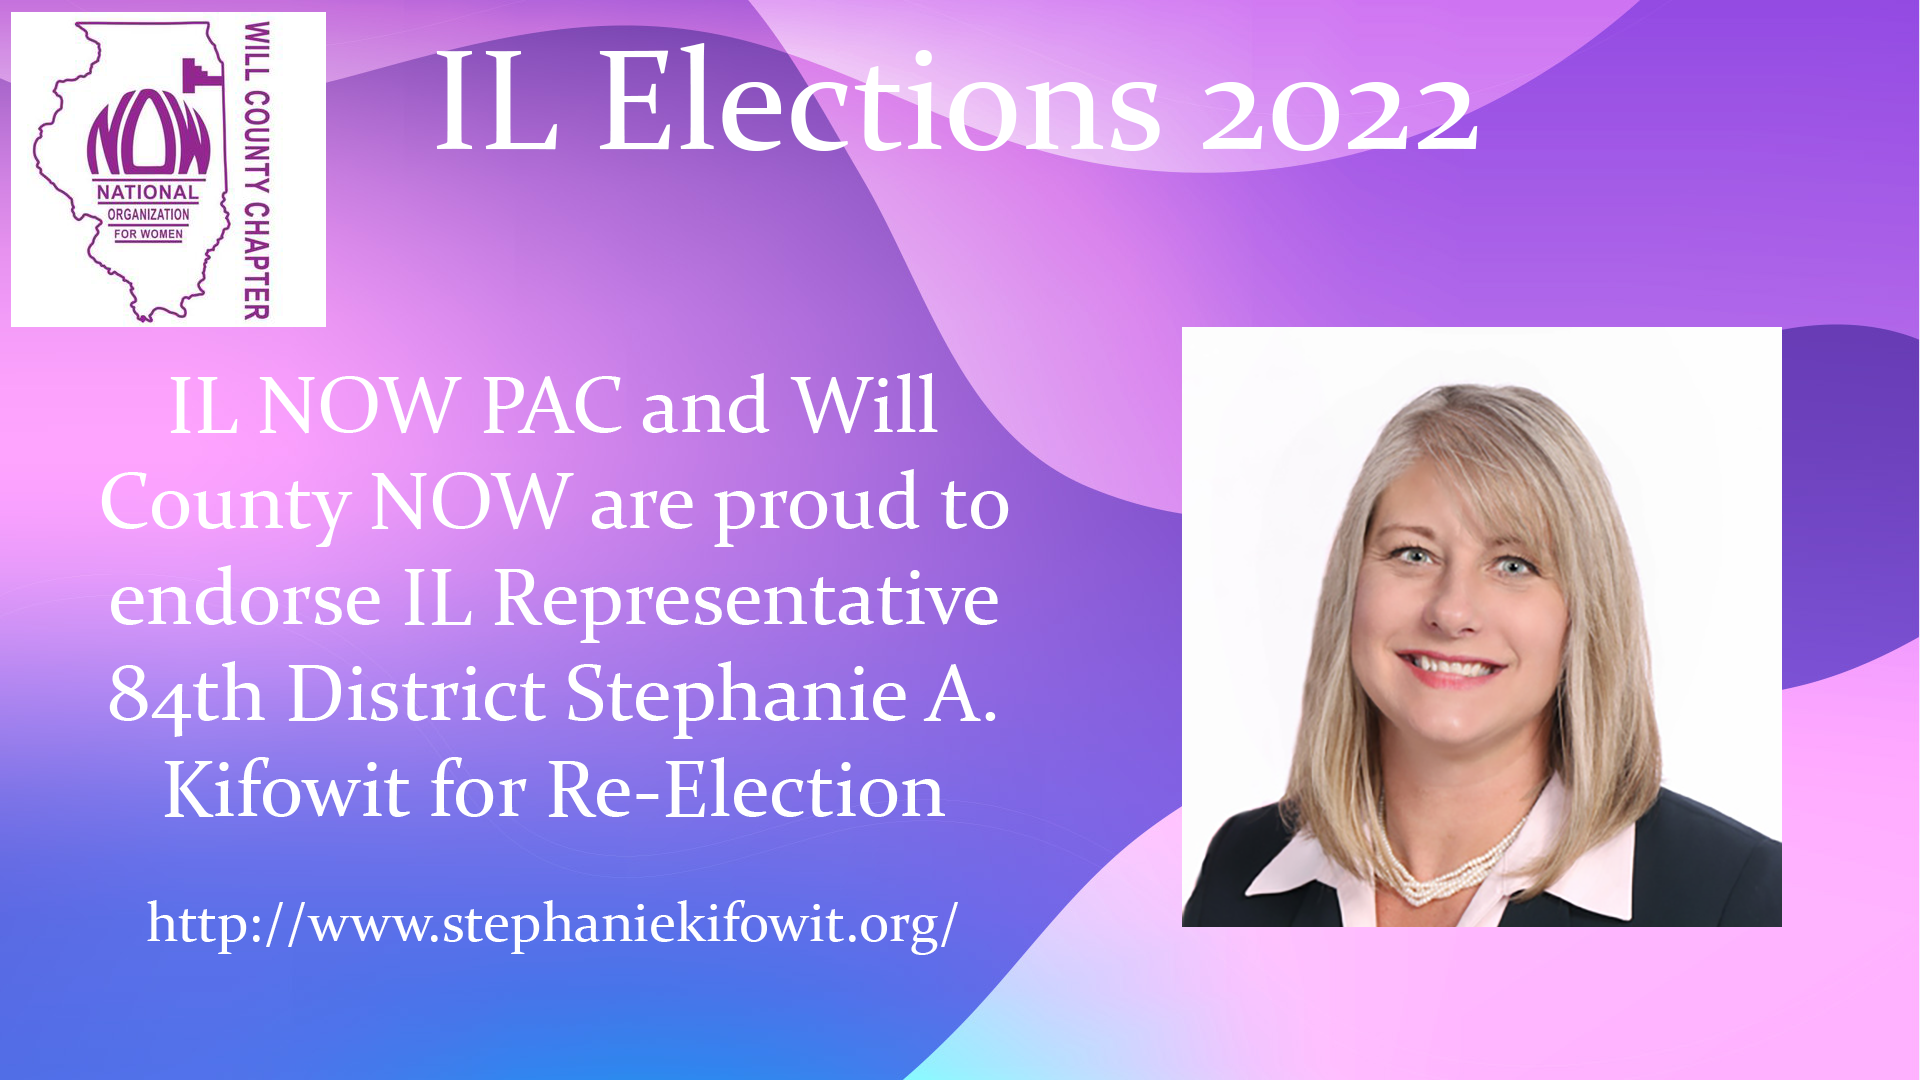 Will County NOW Endorses IL Representative 84th District Stephanie A. Kifowit for Re-Election